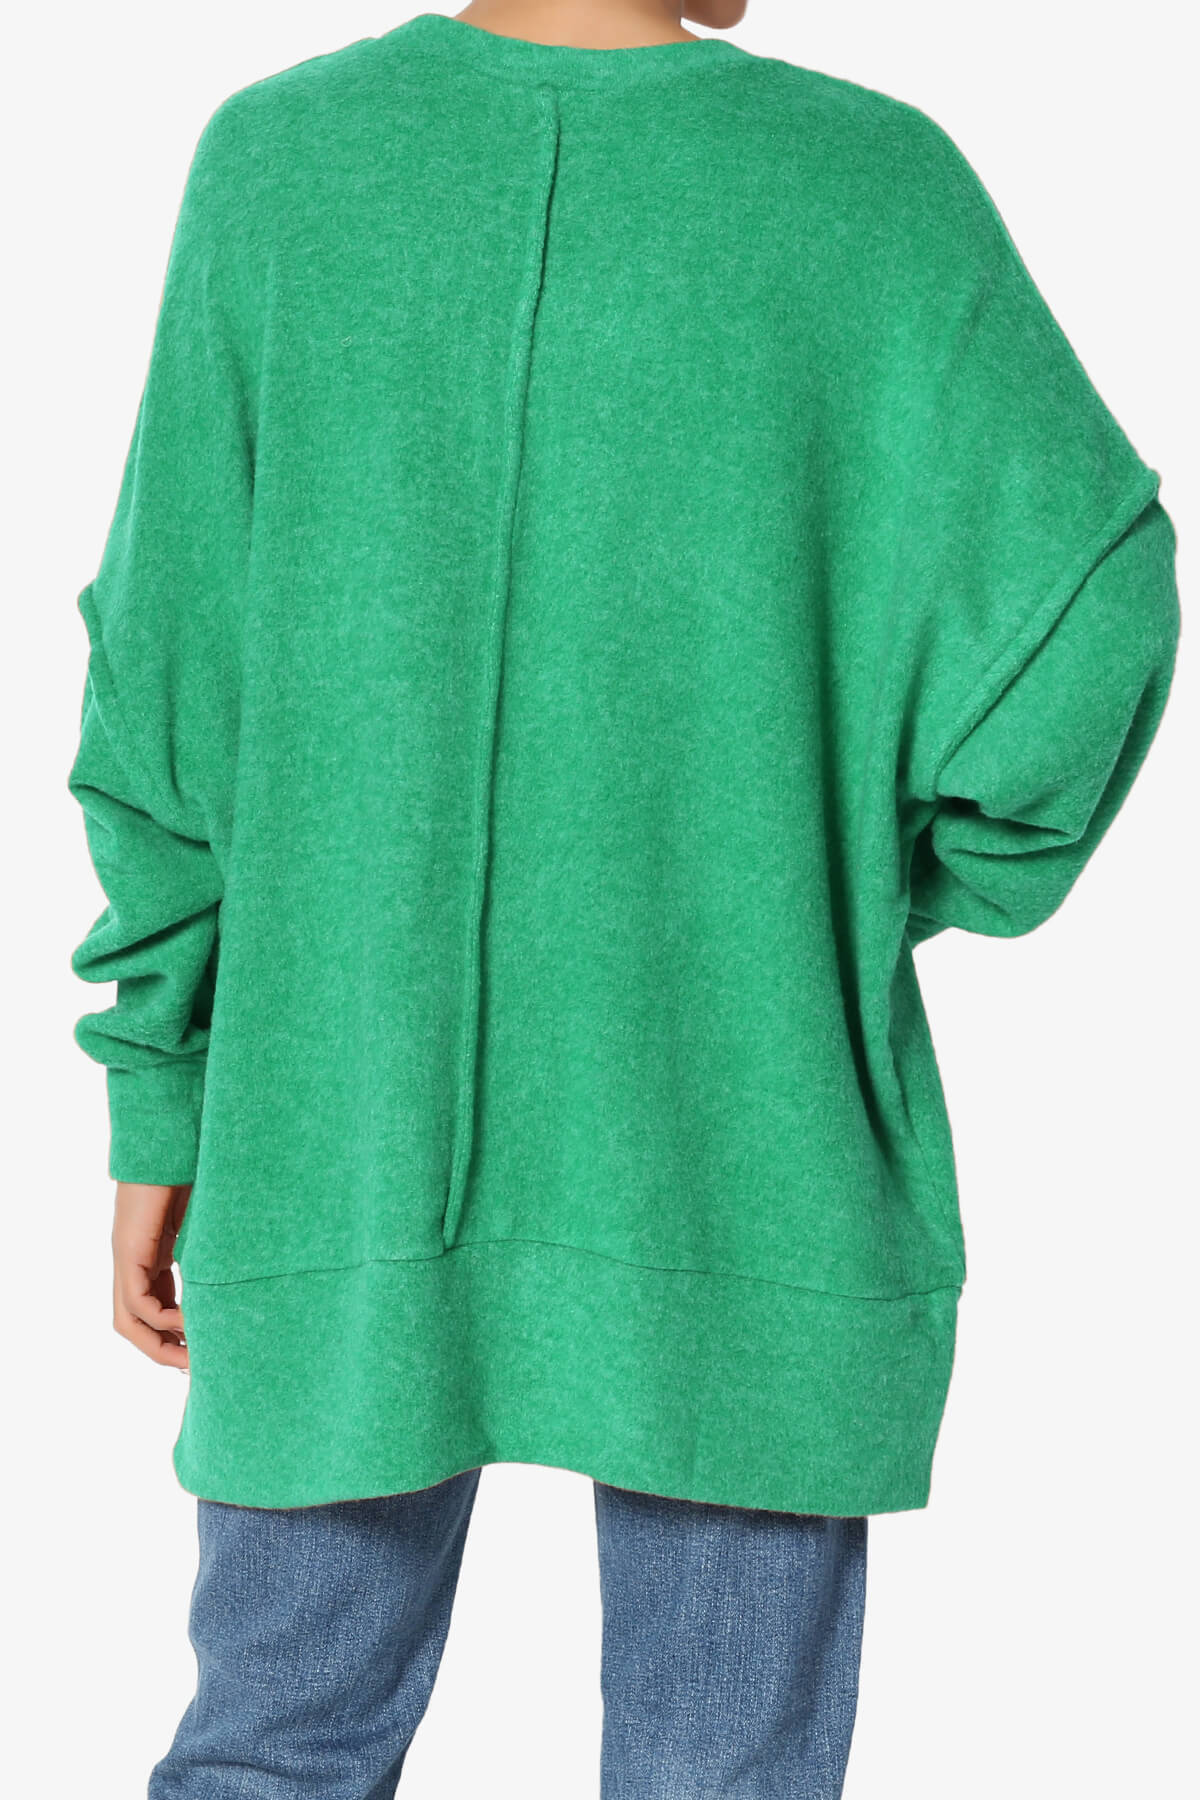 Load image into Gallery viewer, Breccan Blushed Knit Oversized Sweater KELLY GREEN_2
